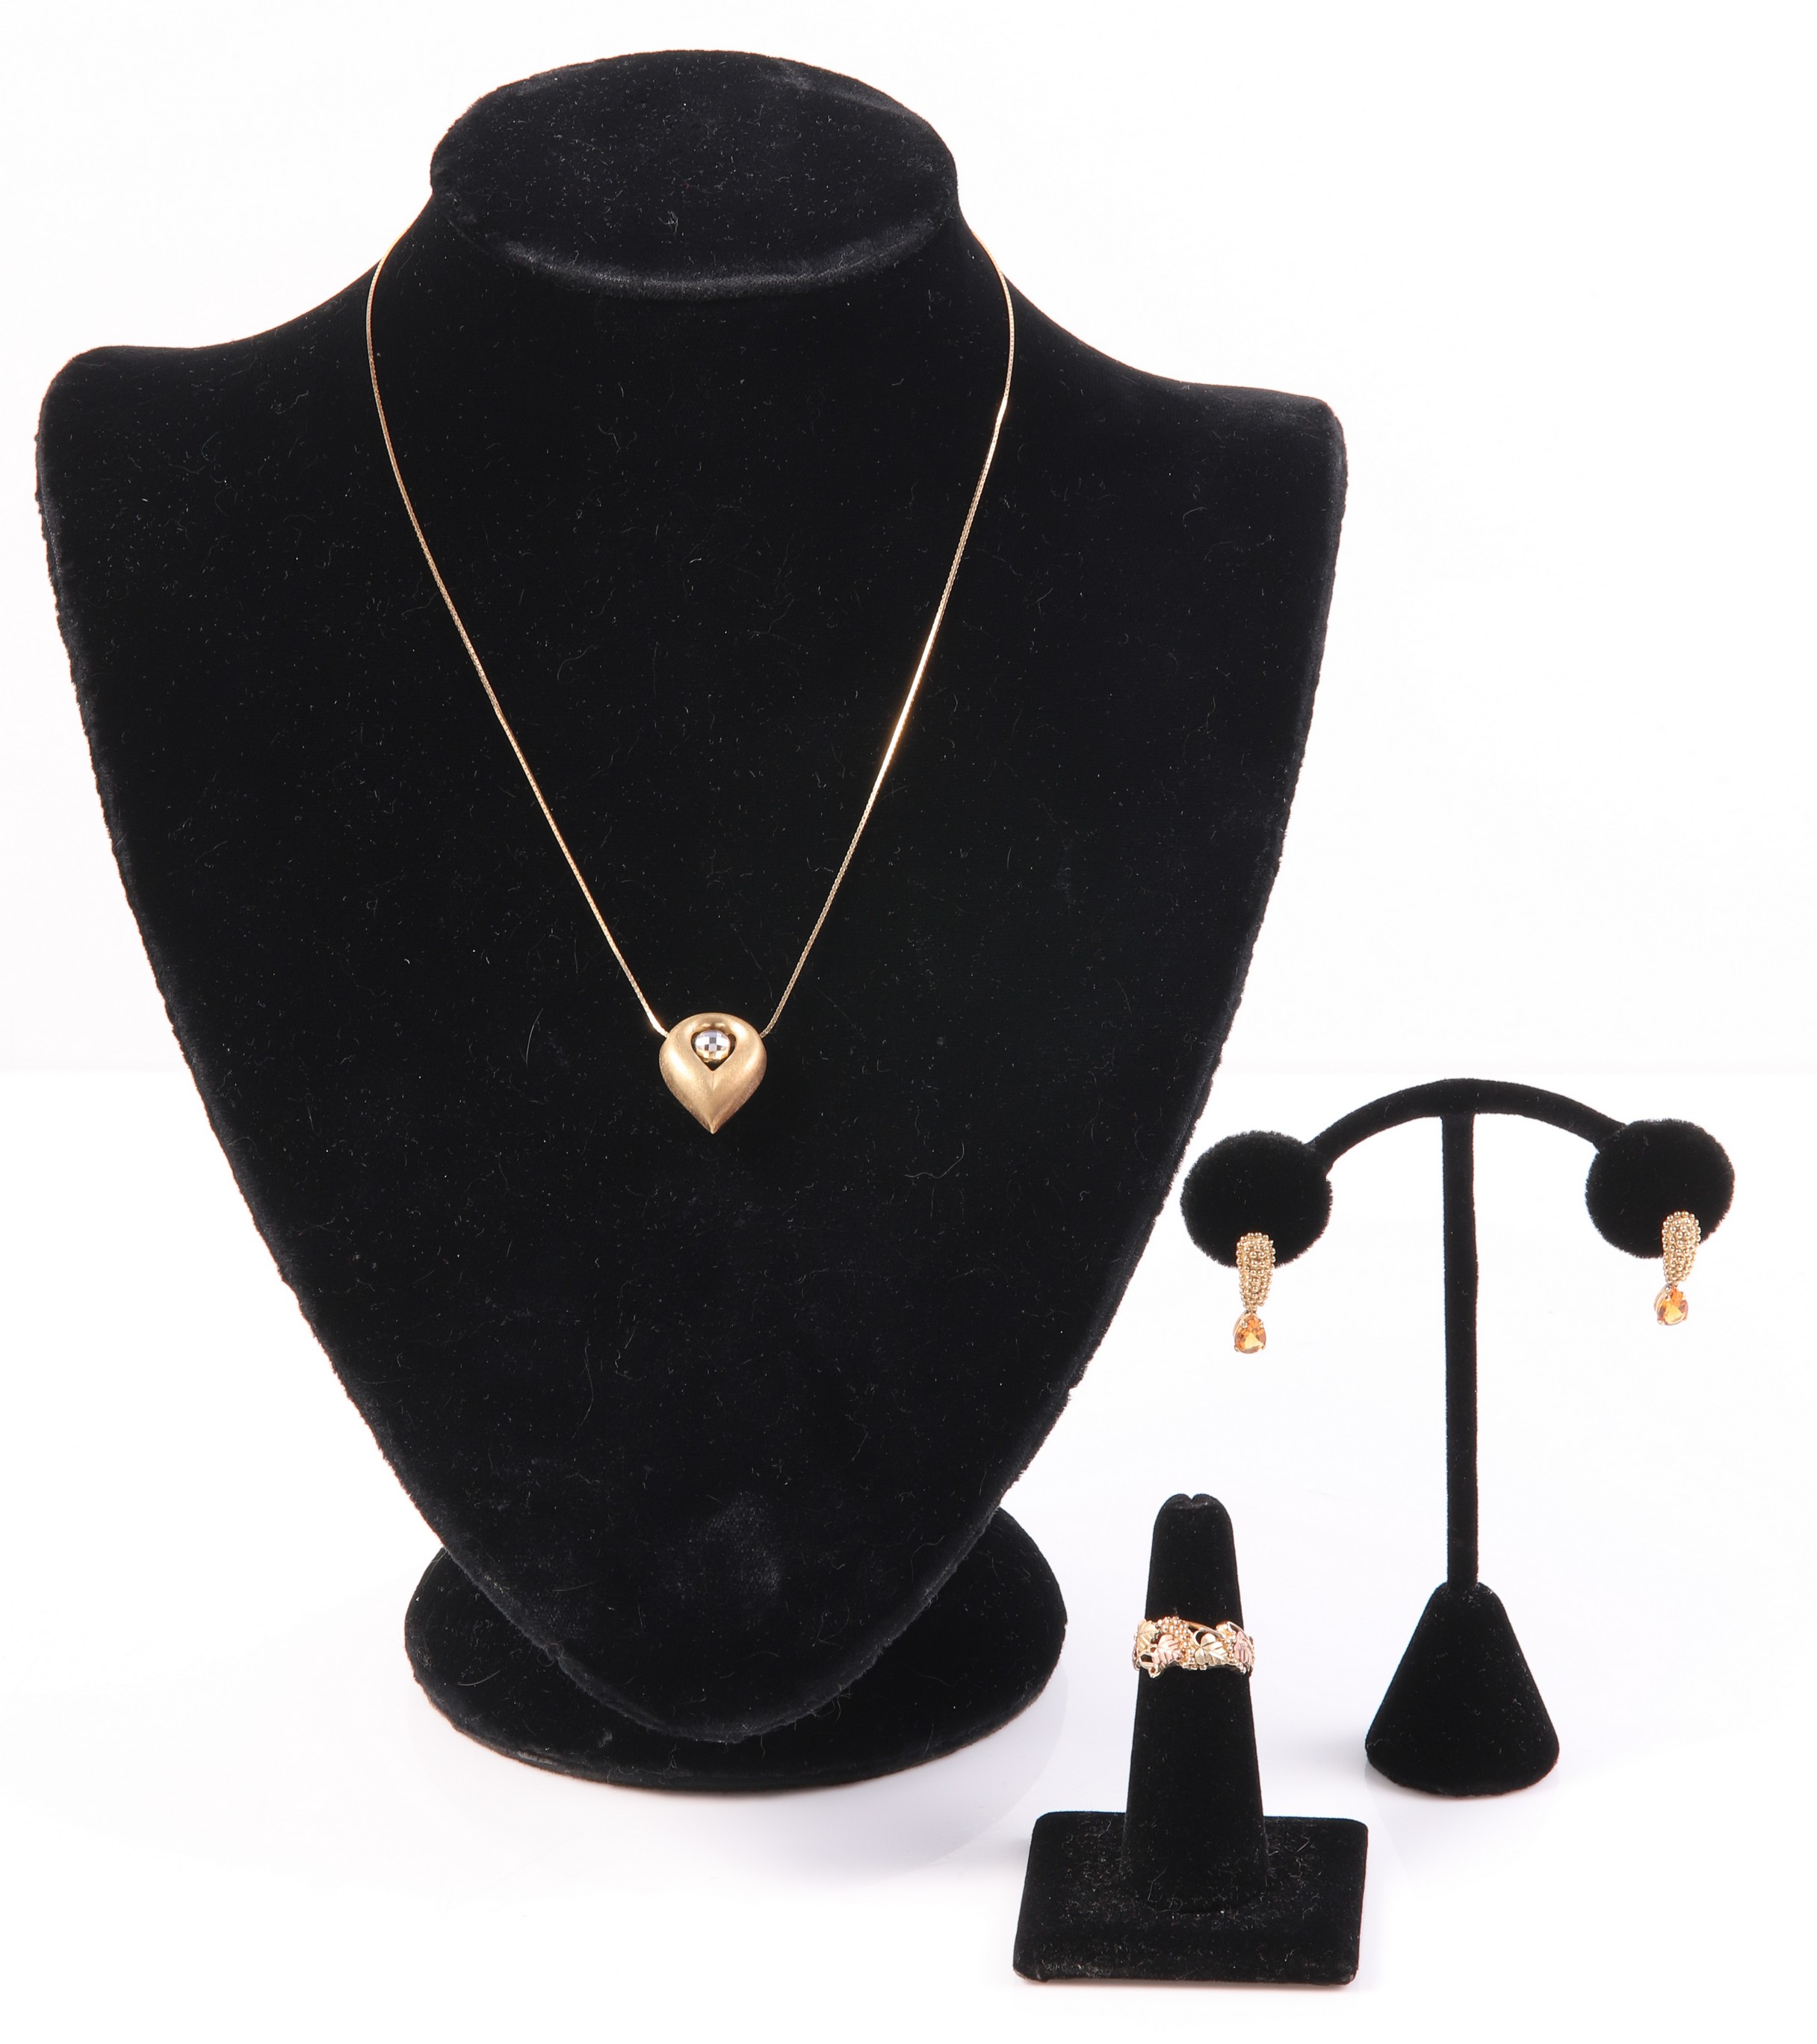 (3) Gold necklace, earrings and